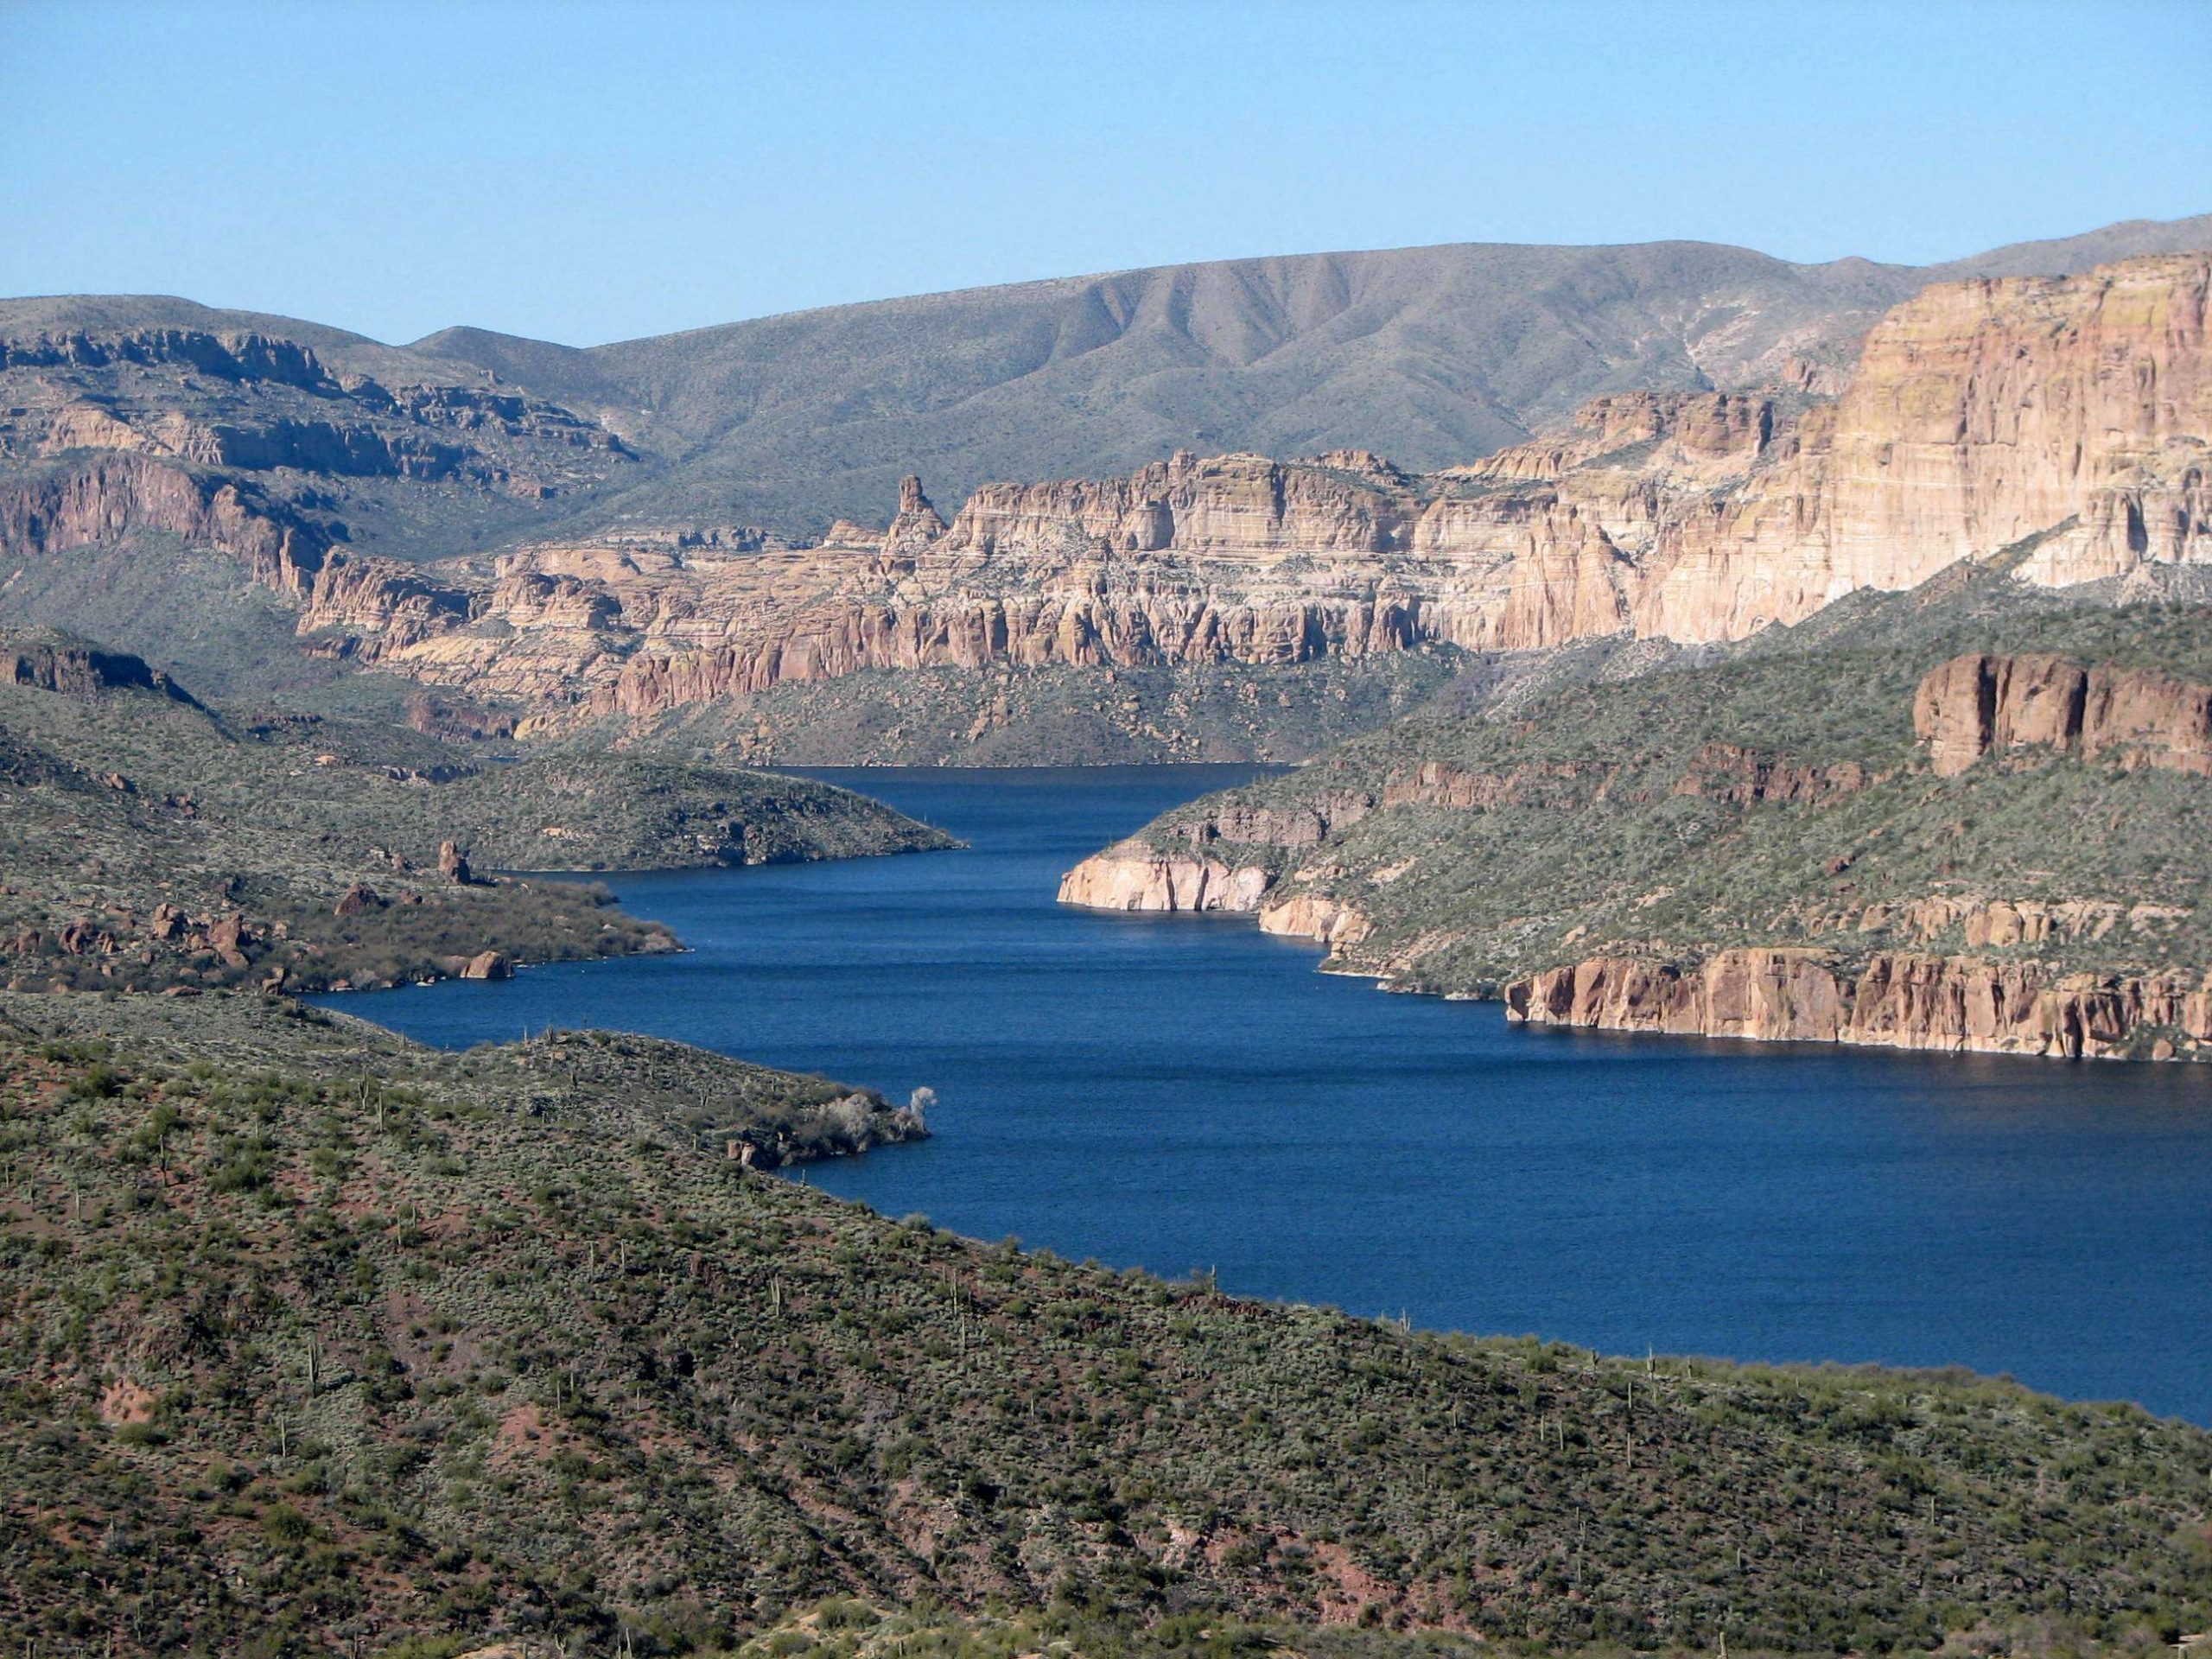 Apache Lake is located near the town of Tortilla Flat in Gila County, Ariz. About 65 miles from Phoenix, Apache Lake is formed by the Horse Mesa Dam impounded Salt River.